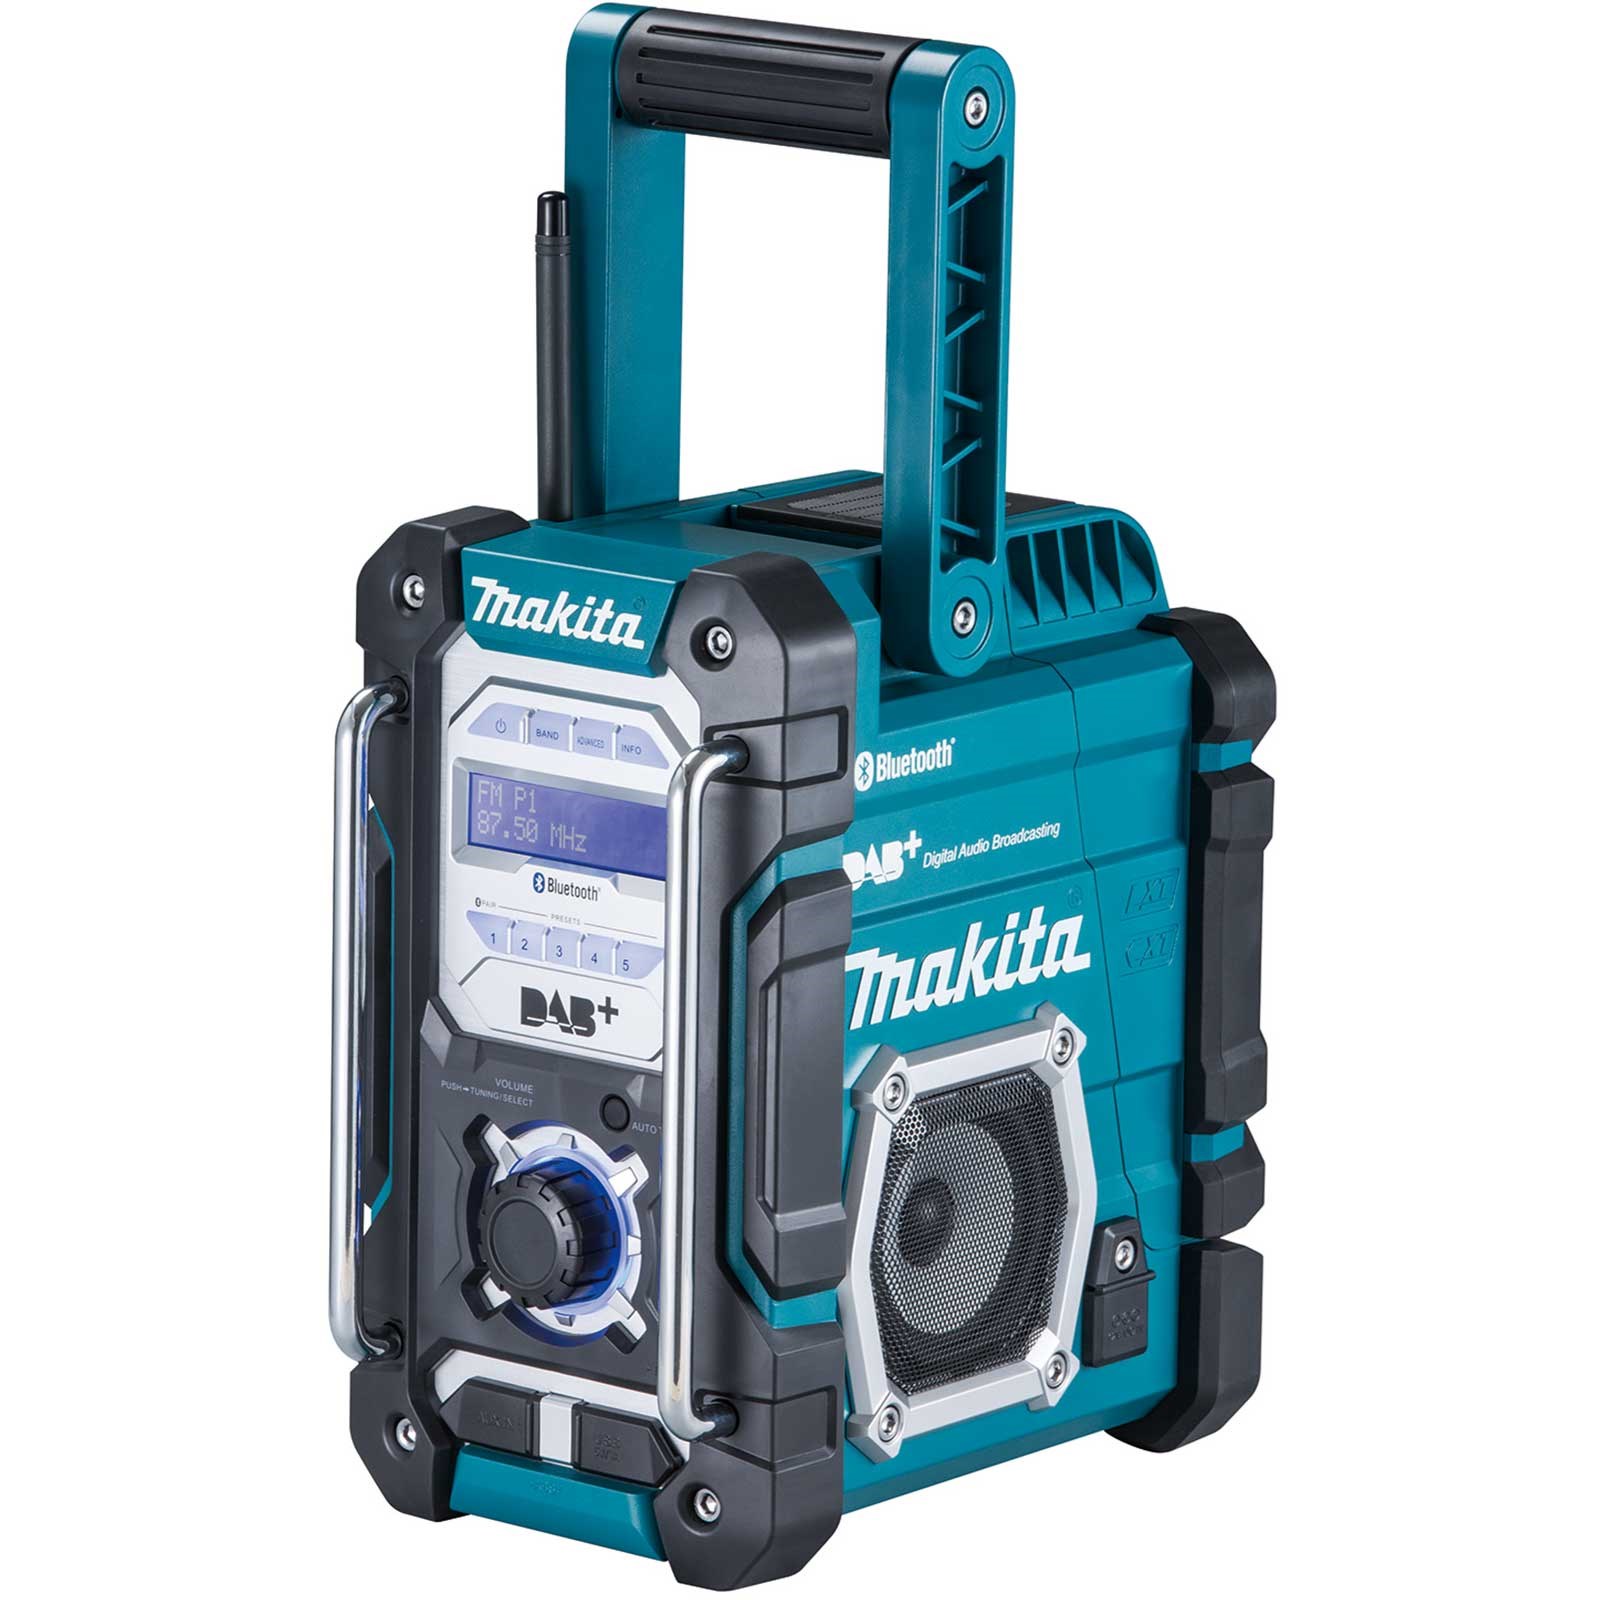 Makita DMR112 Dab+ Job Site Radio and Bluetooth Connection - Body Only